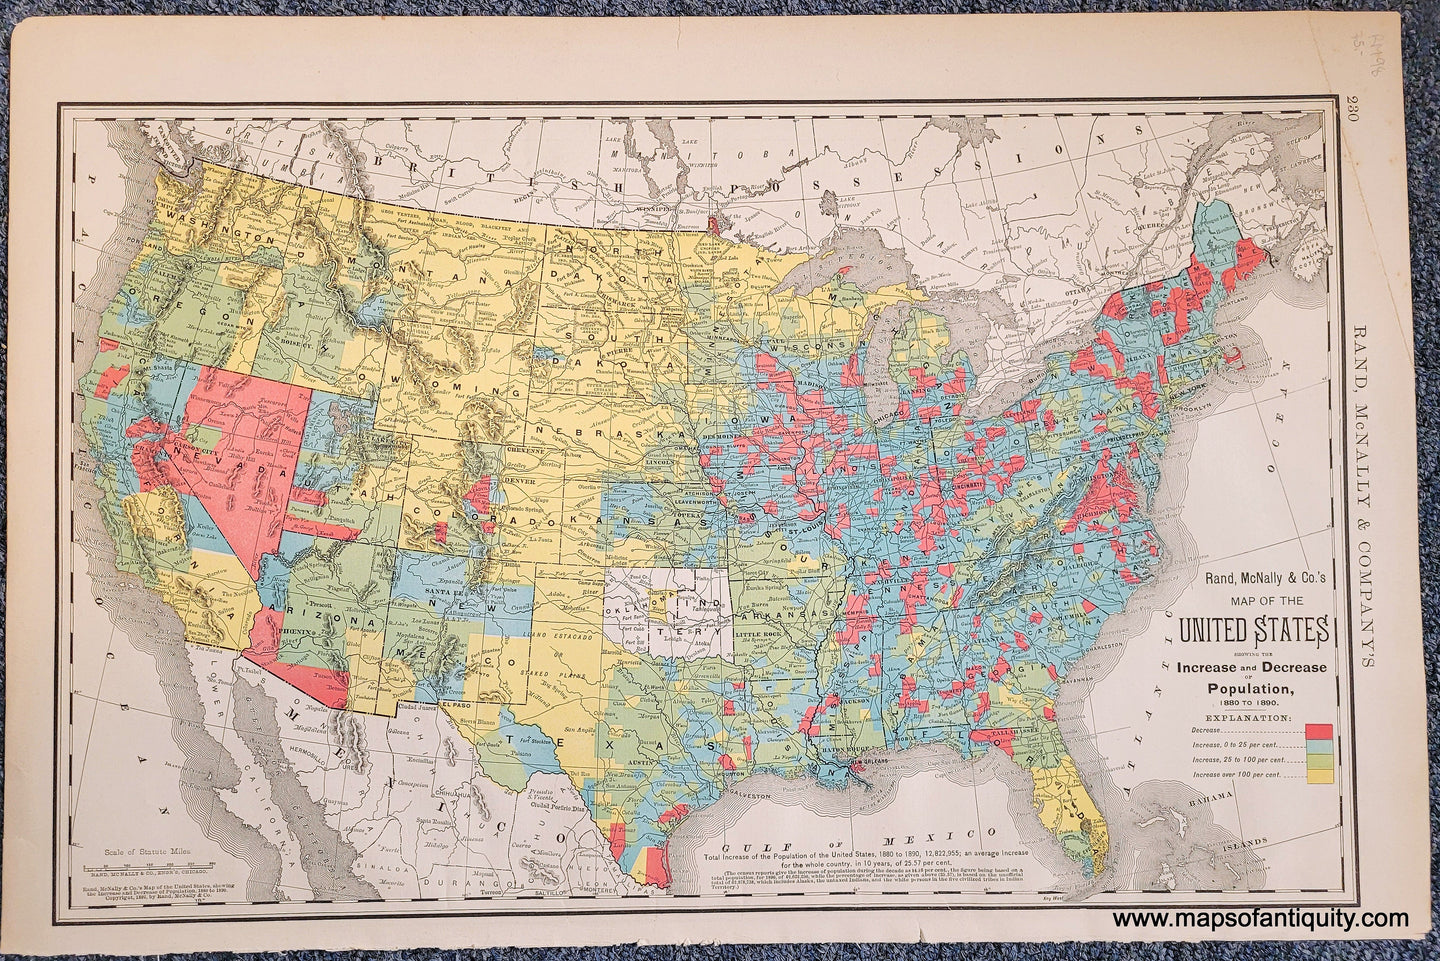 Genuine-Antique-Map-Map-of-the-United-States-showing-the-Increase-and-Decrease-of-Population-1880-to-1890-United-States--1898-Rand-McNally-Maps-Of-Antiquity-1800s-19th-century